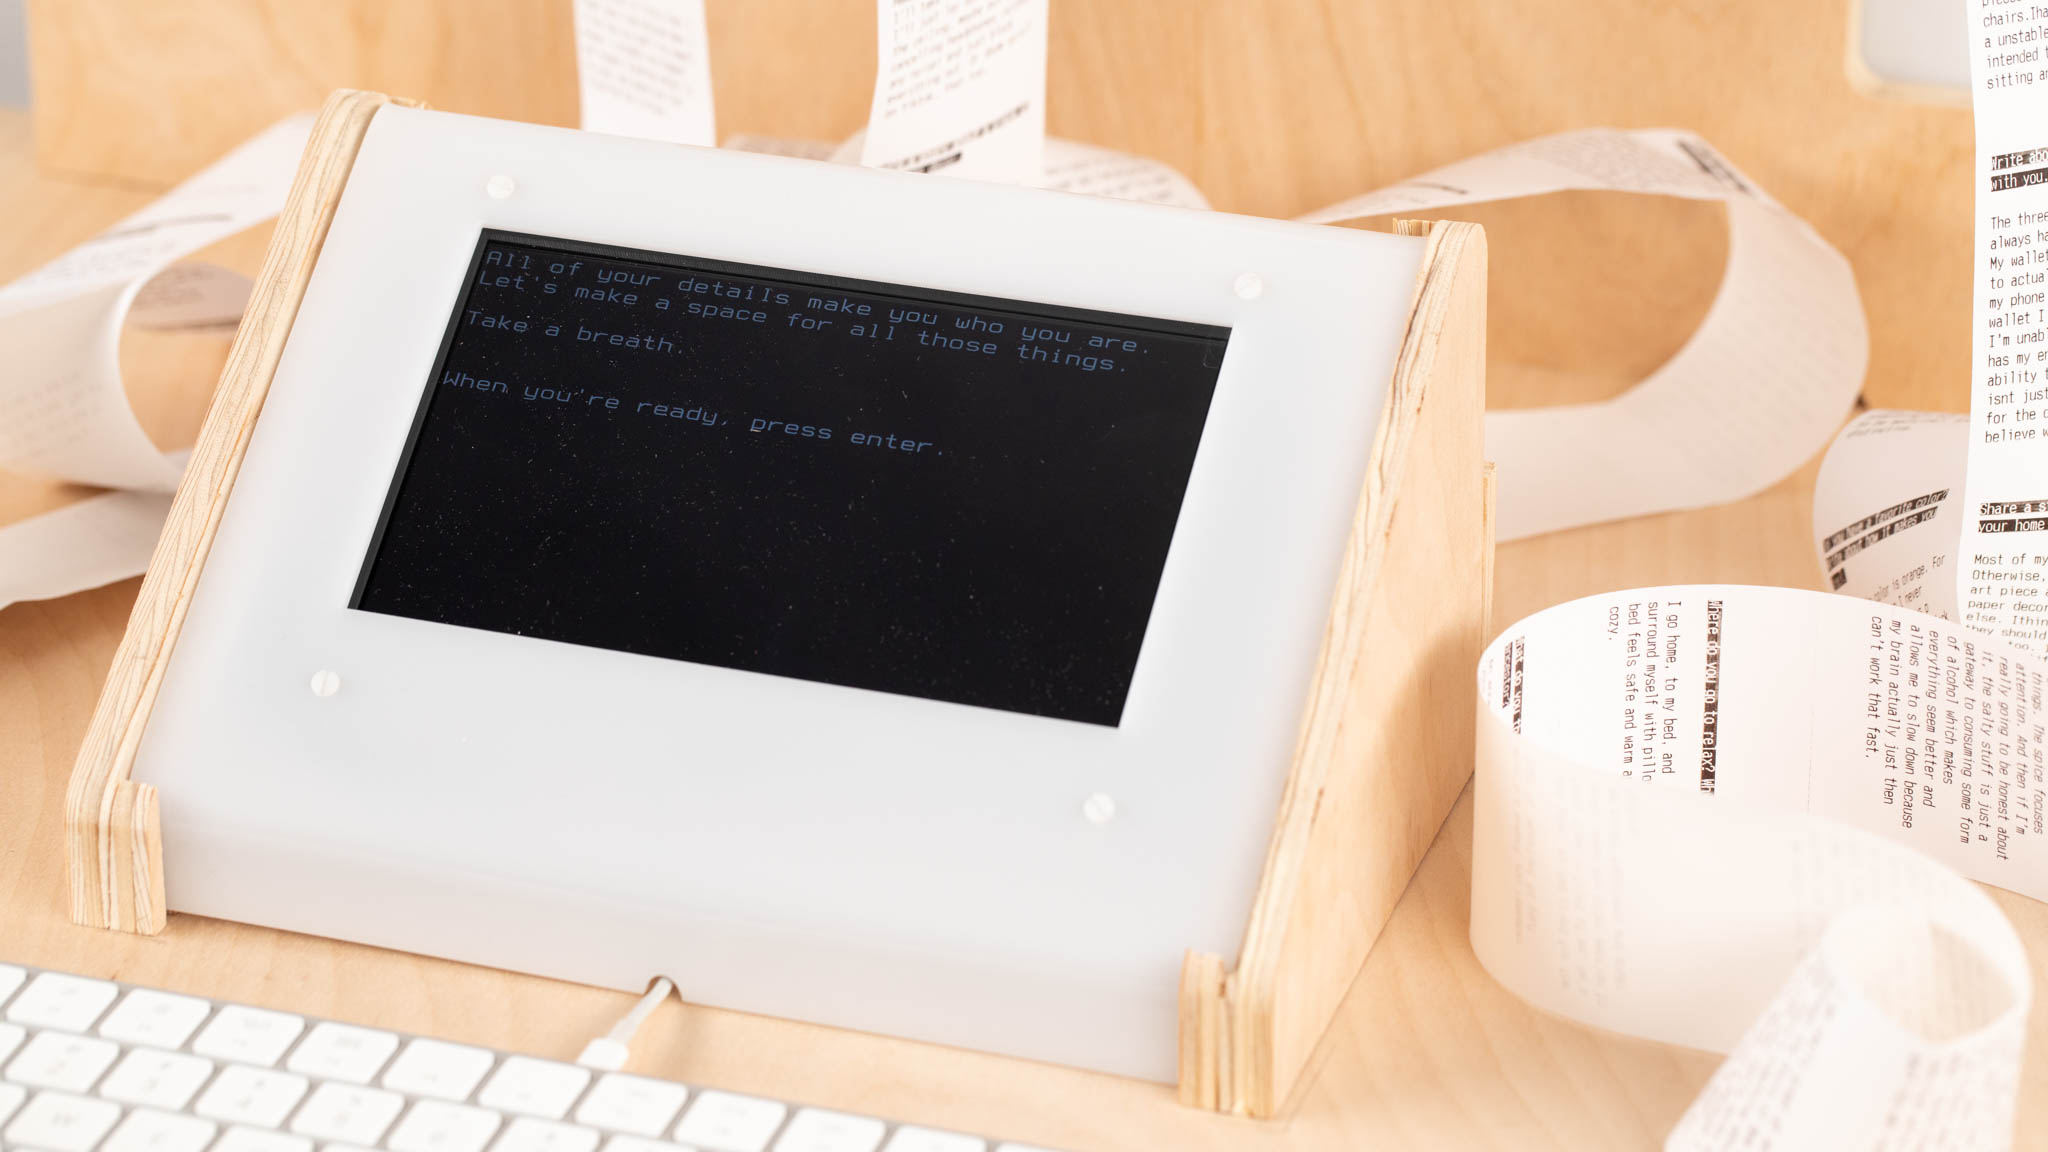 Console screen mounted to white acrylic, surrounded by rolls of paper. The screen reads the text included in caption.